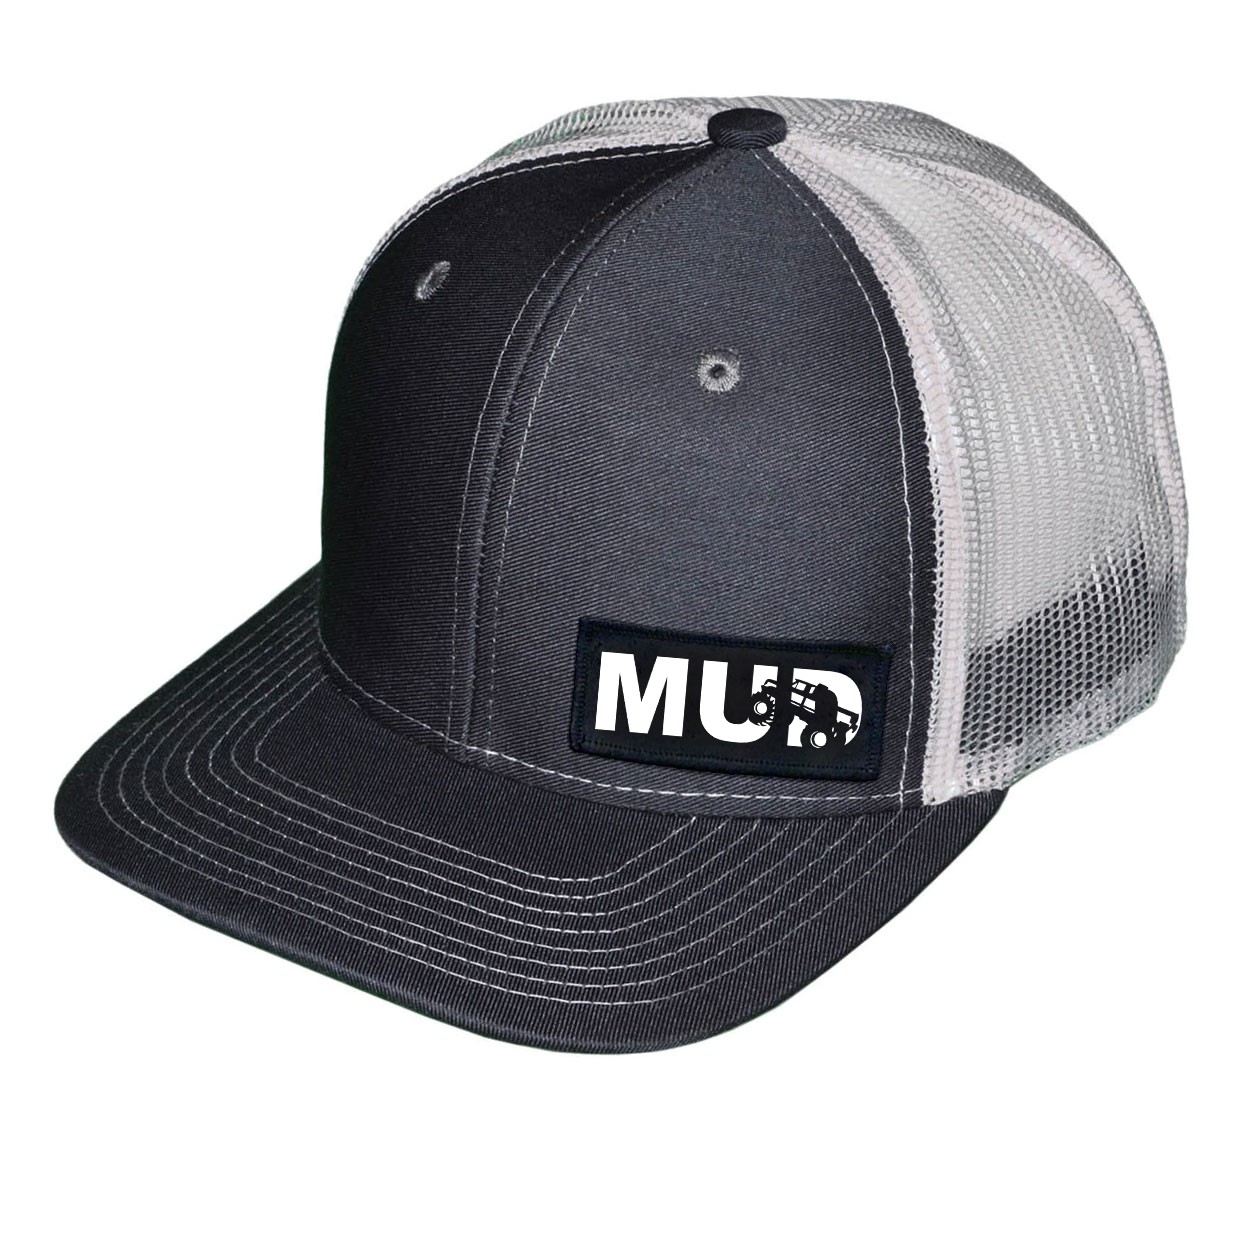 Mud Truck Logo Night Out Woven Patch Snapback Trucker Hat Gray/White (White Logo)